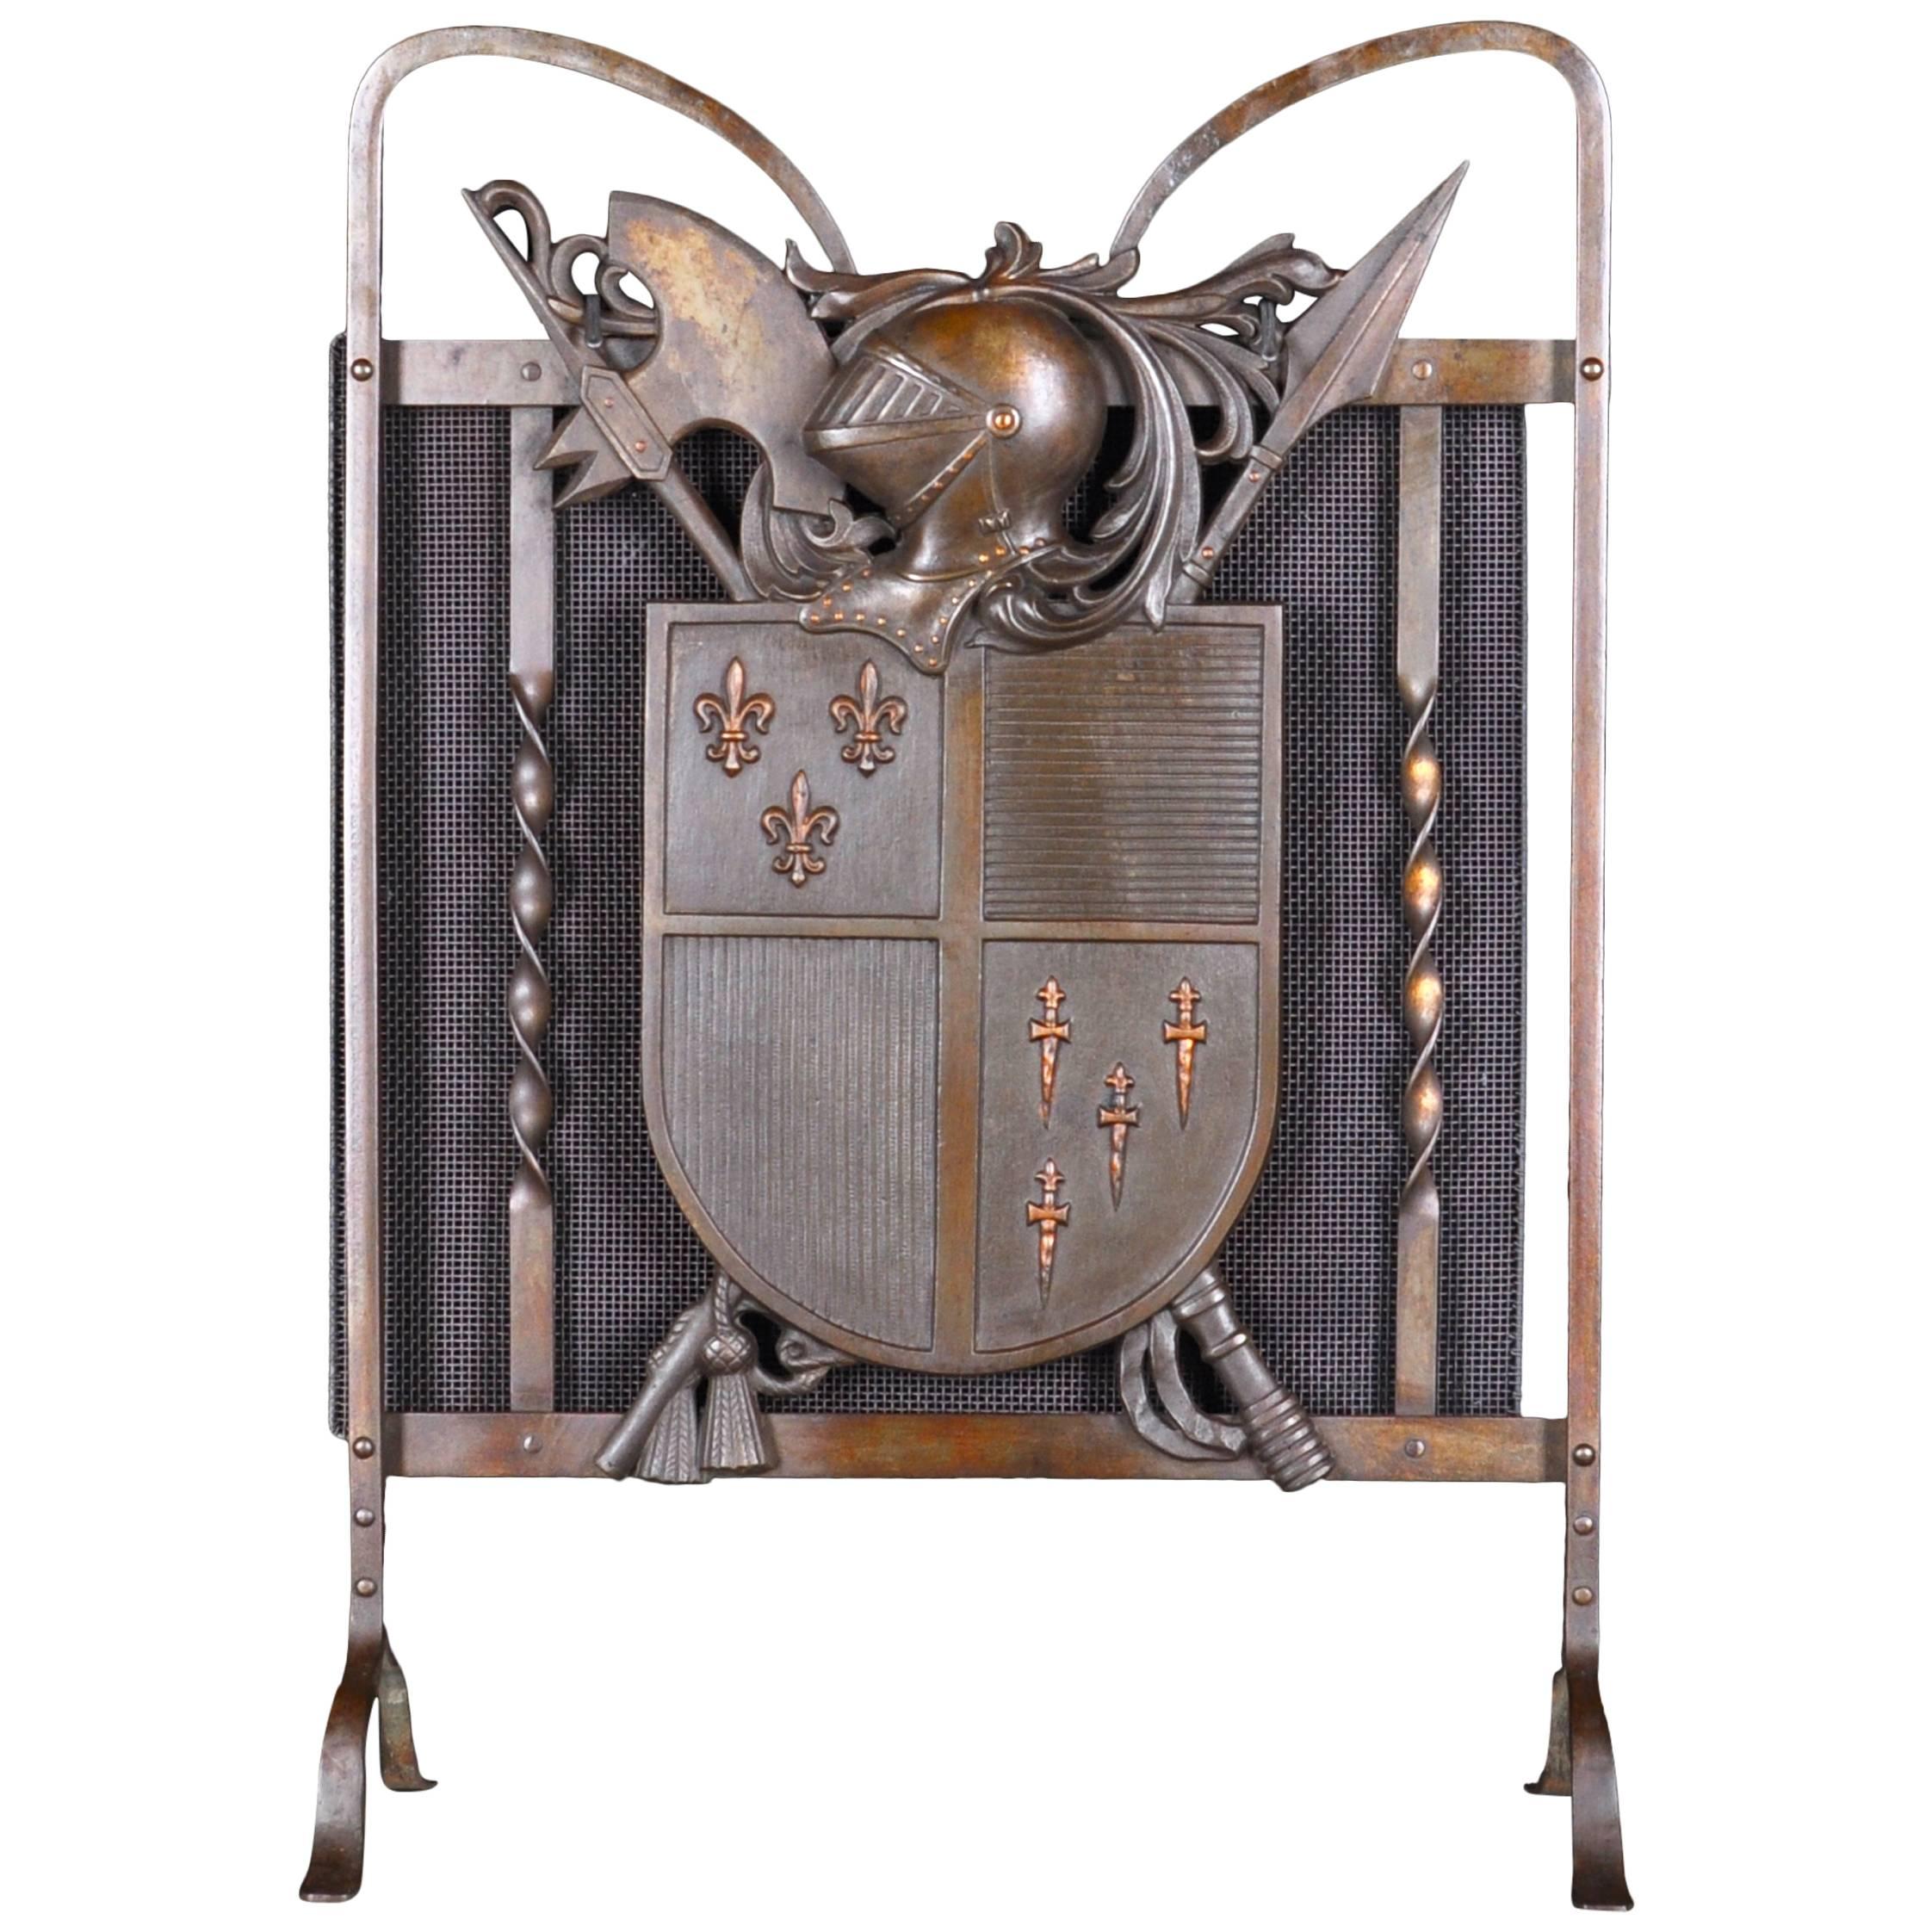 Armorial Bronze and Iron Fire-Guard with Medieval Trophies and Knight's Helmet